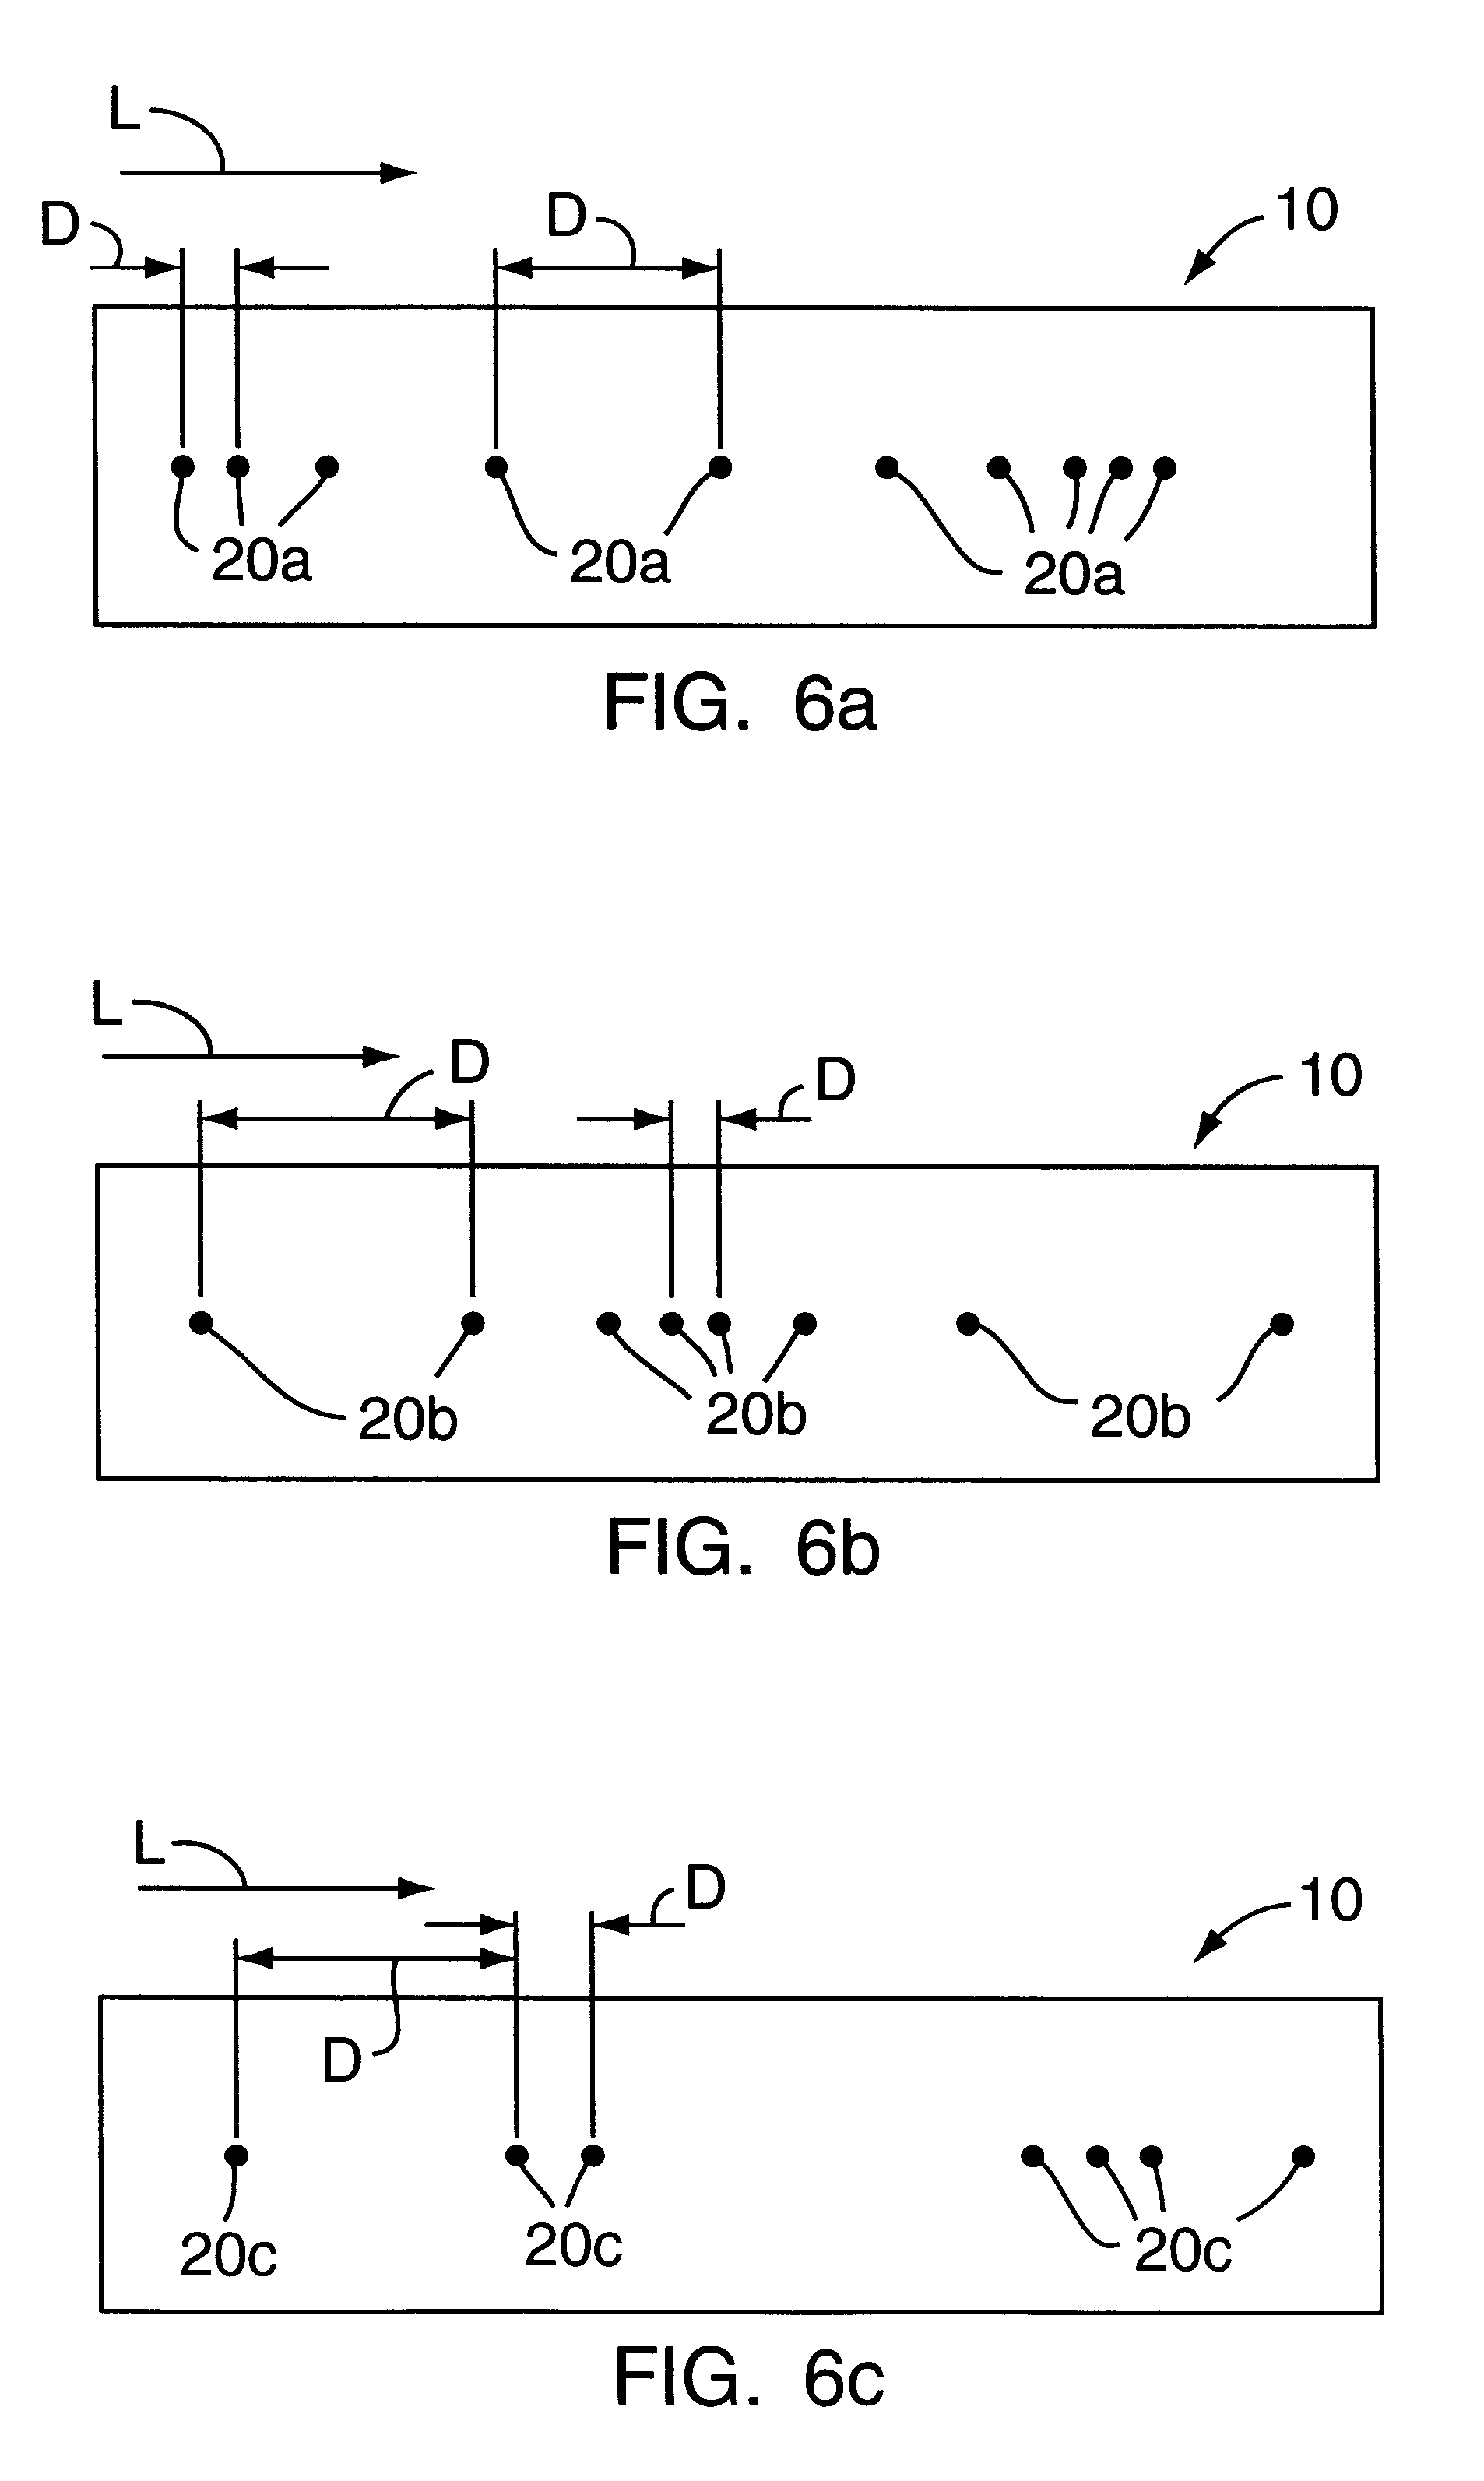 Radiating coaxial cable having groups of spaced apertures for generating a surface wave at a low frequencies and a combination of surface and radiated waves at higher frequencies